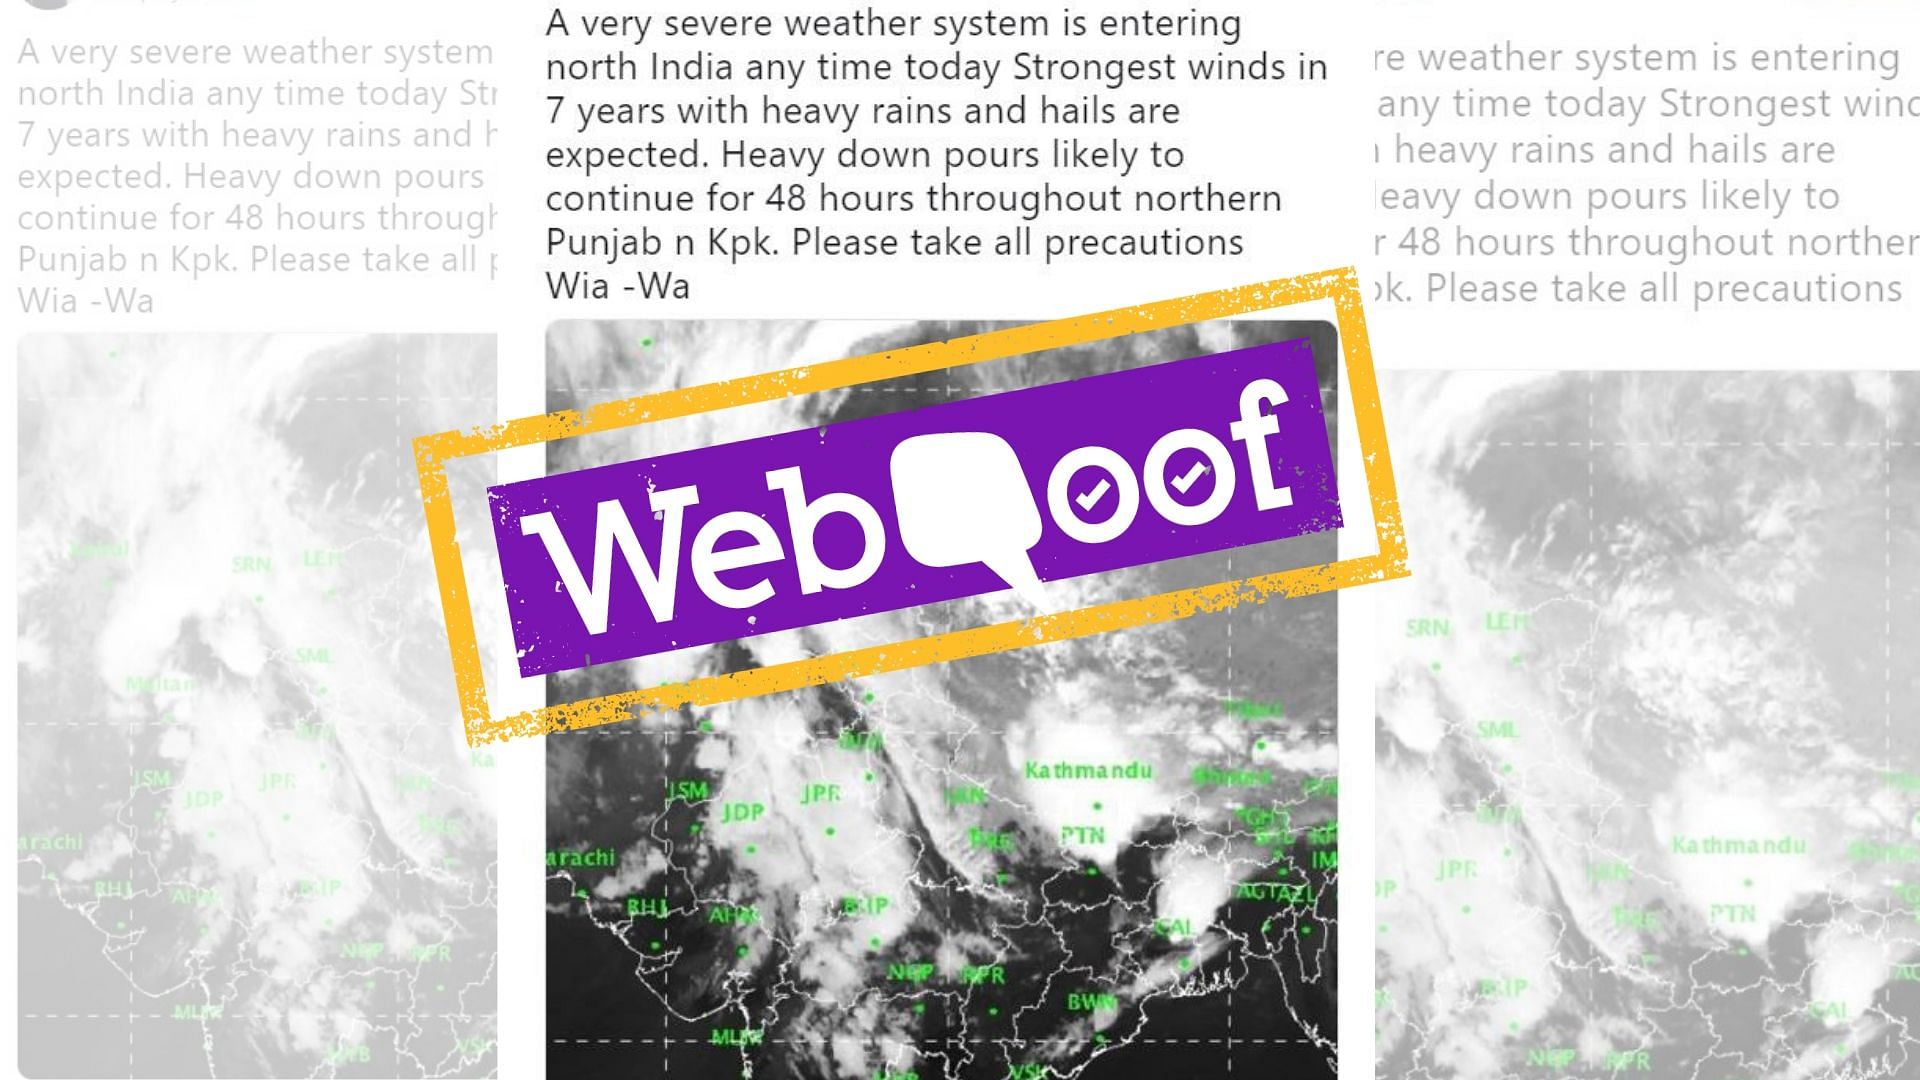 A viral message claimed that a severe weather system will hit India, witnessing the strongest winds in seven years.